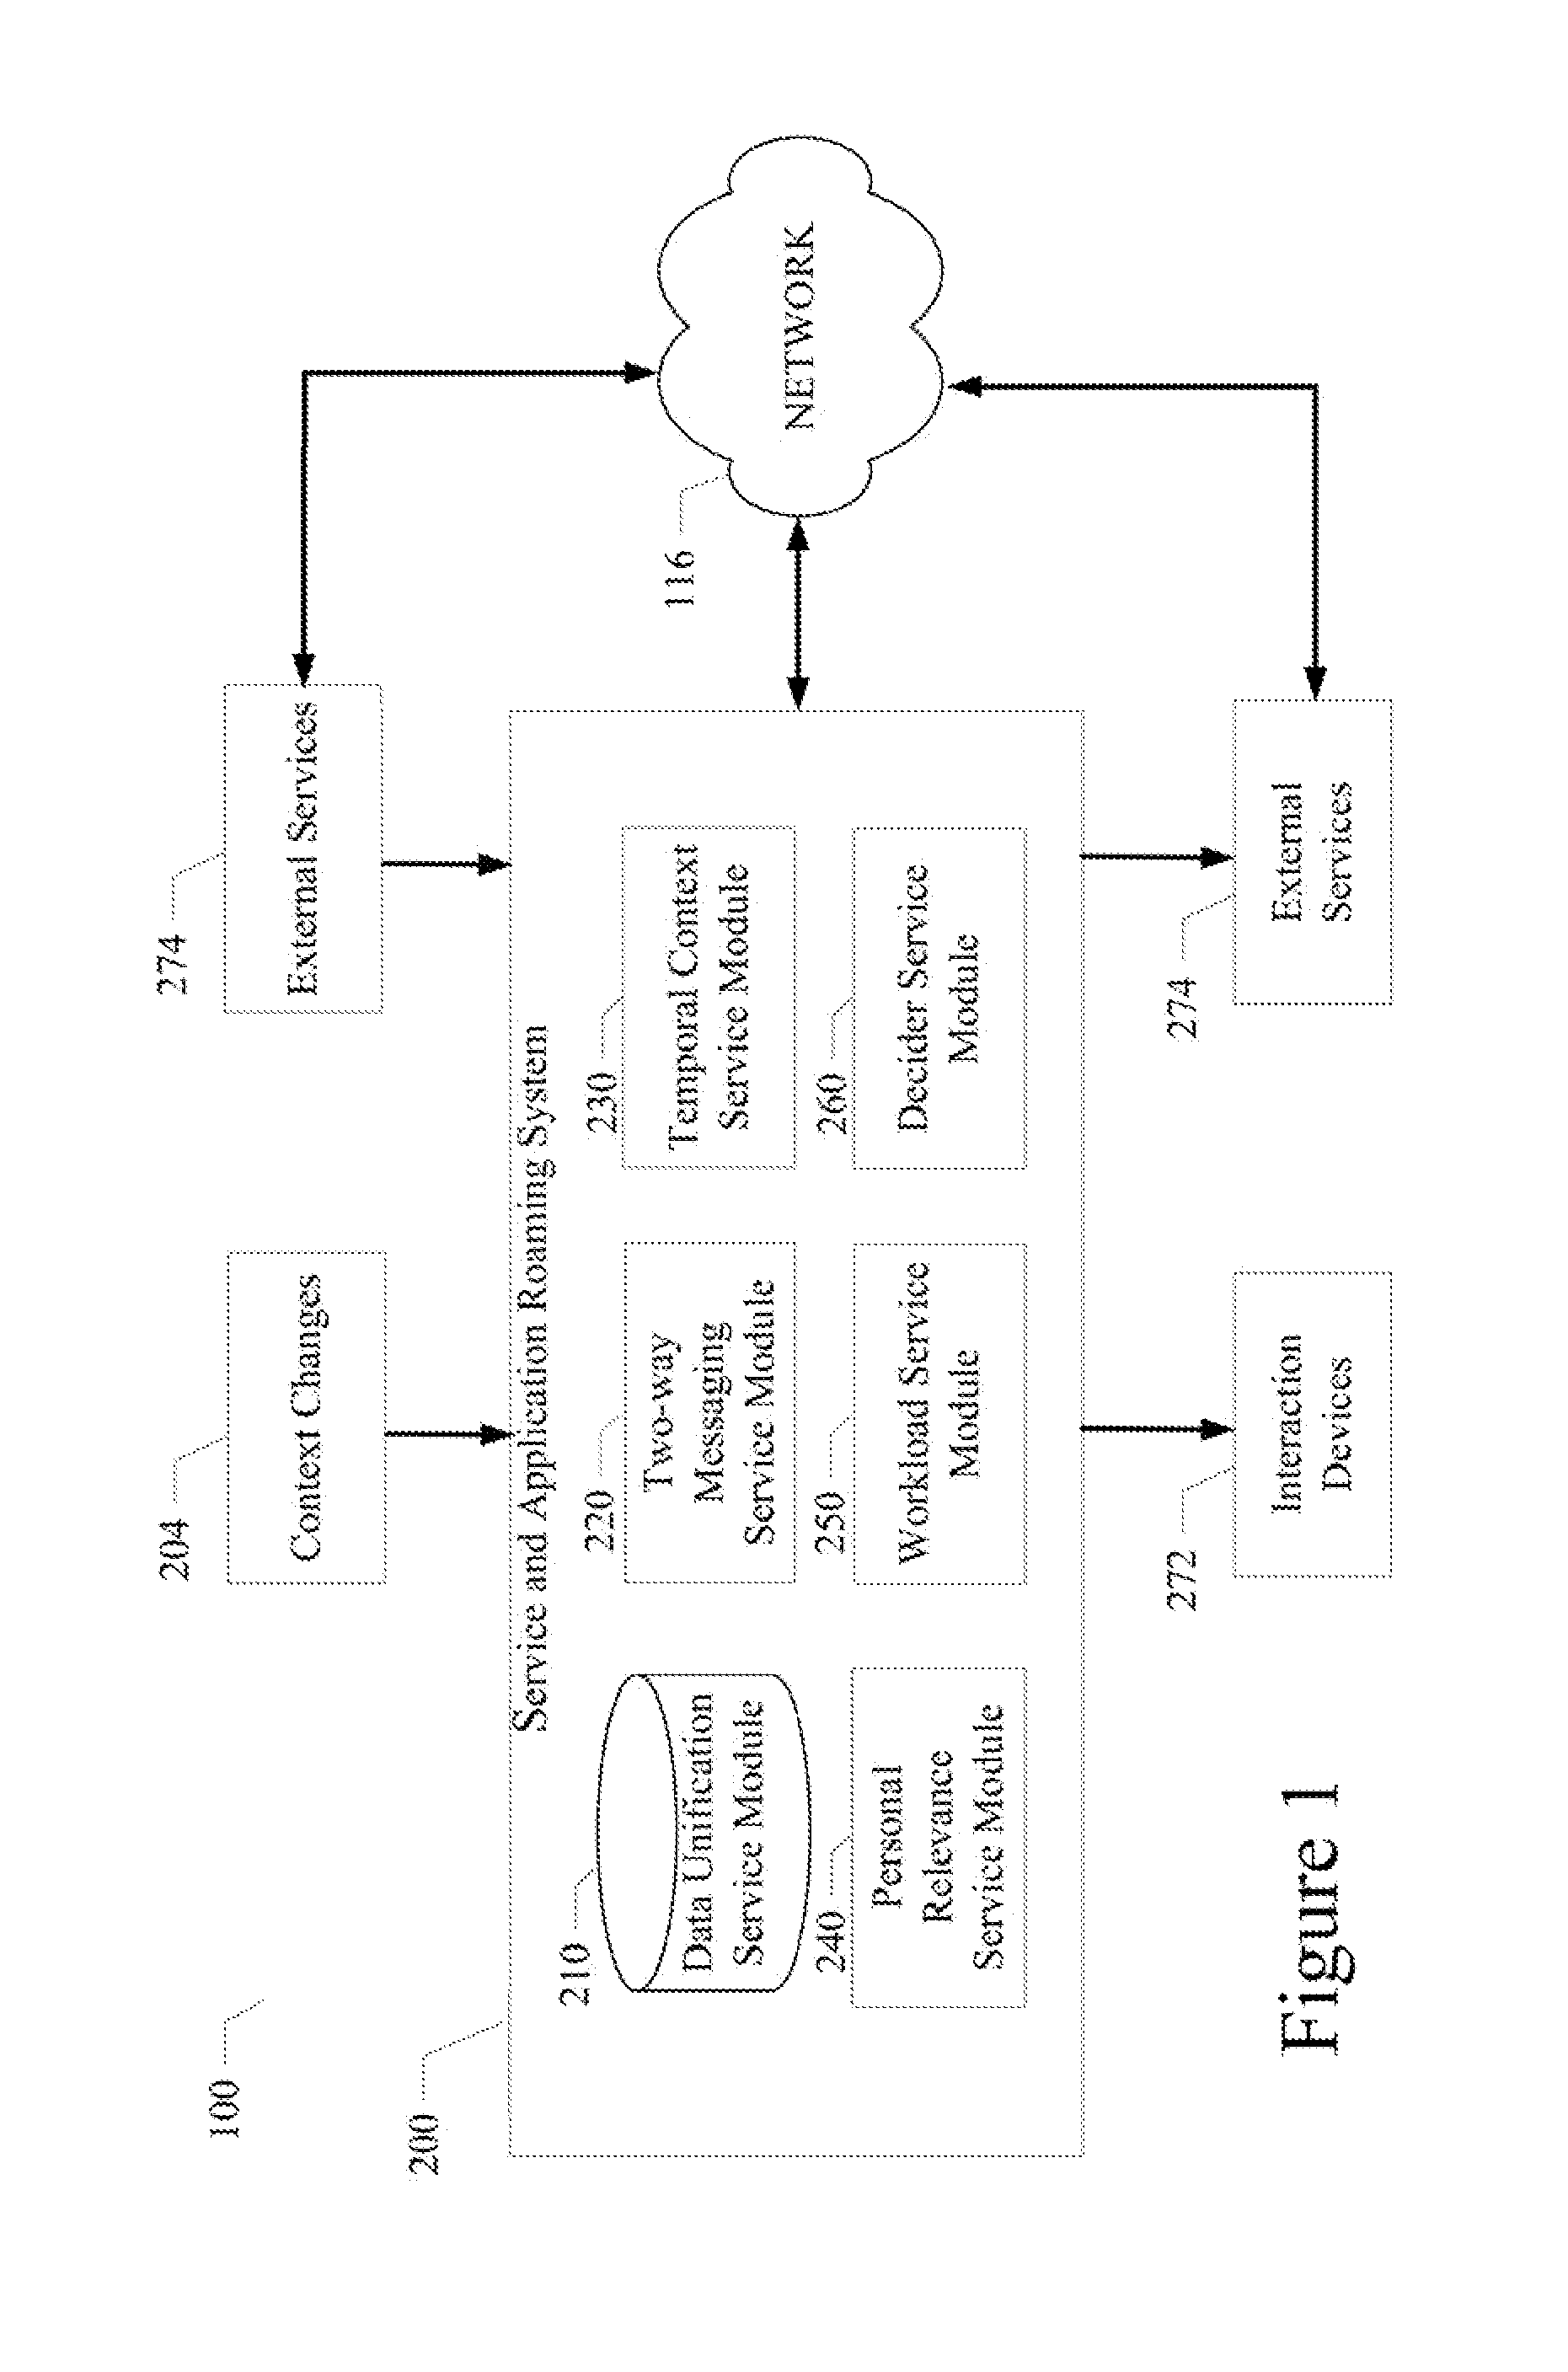 System and method enabling service and application roaming